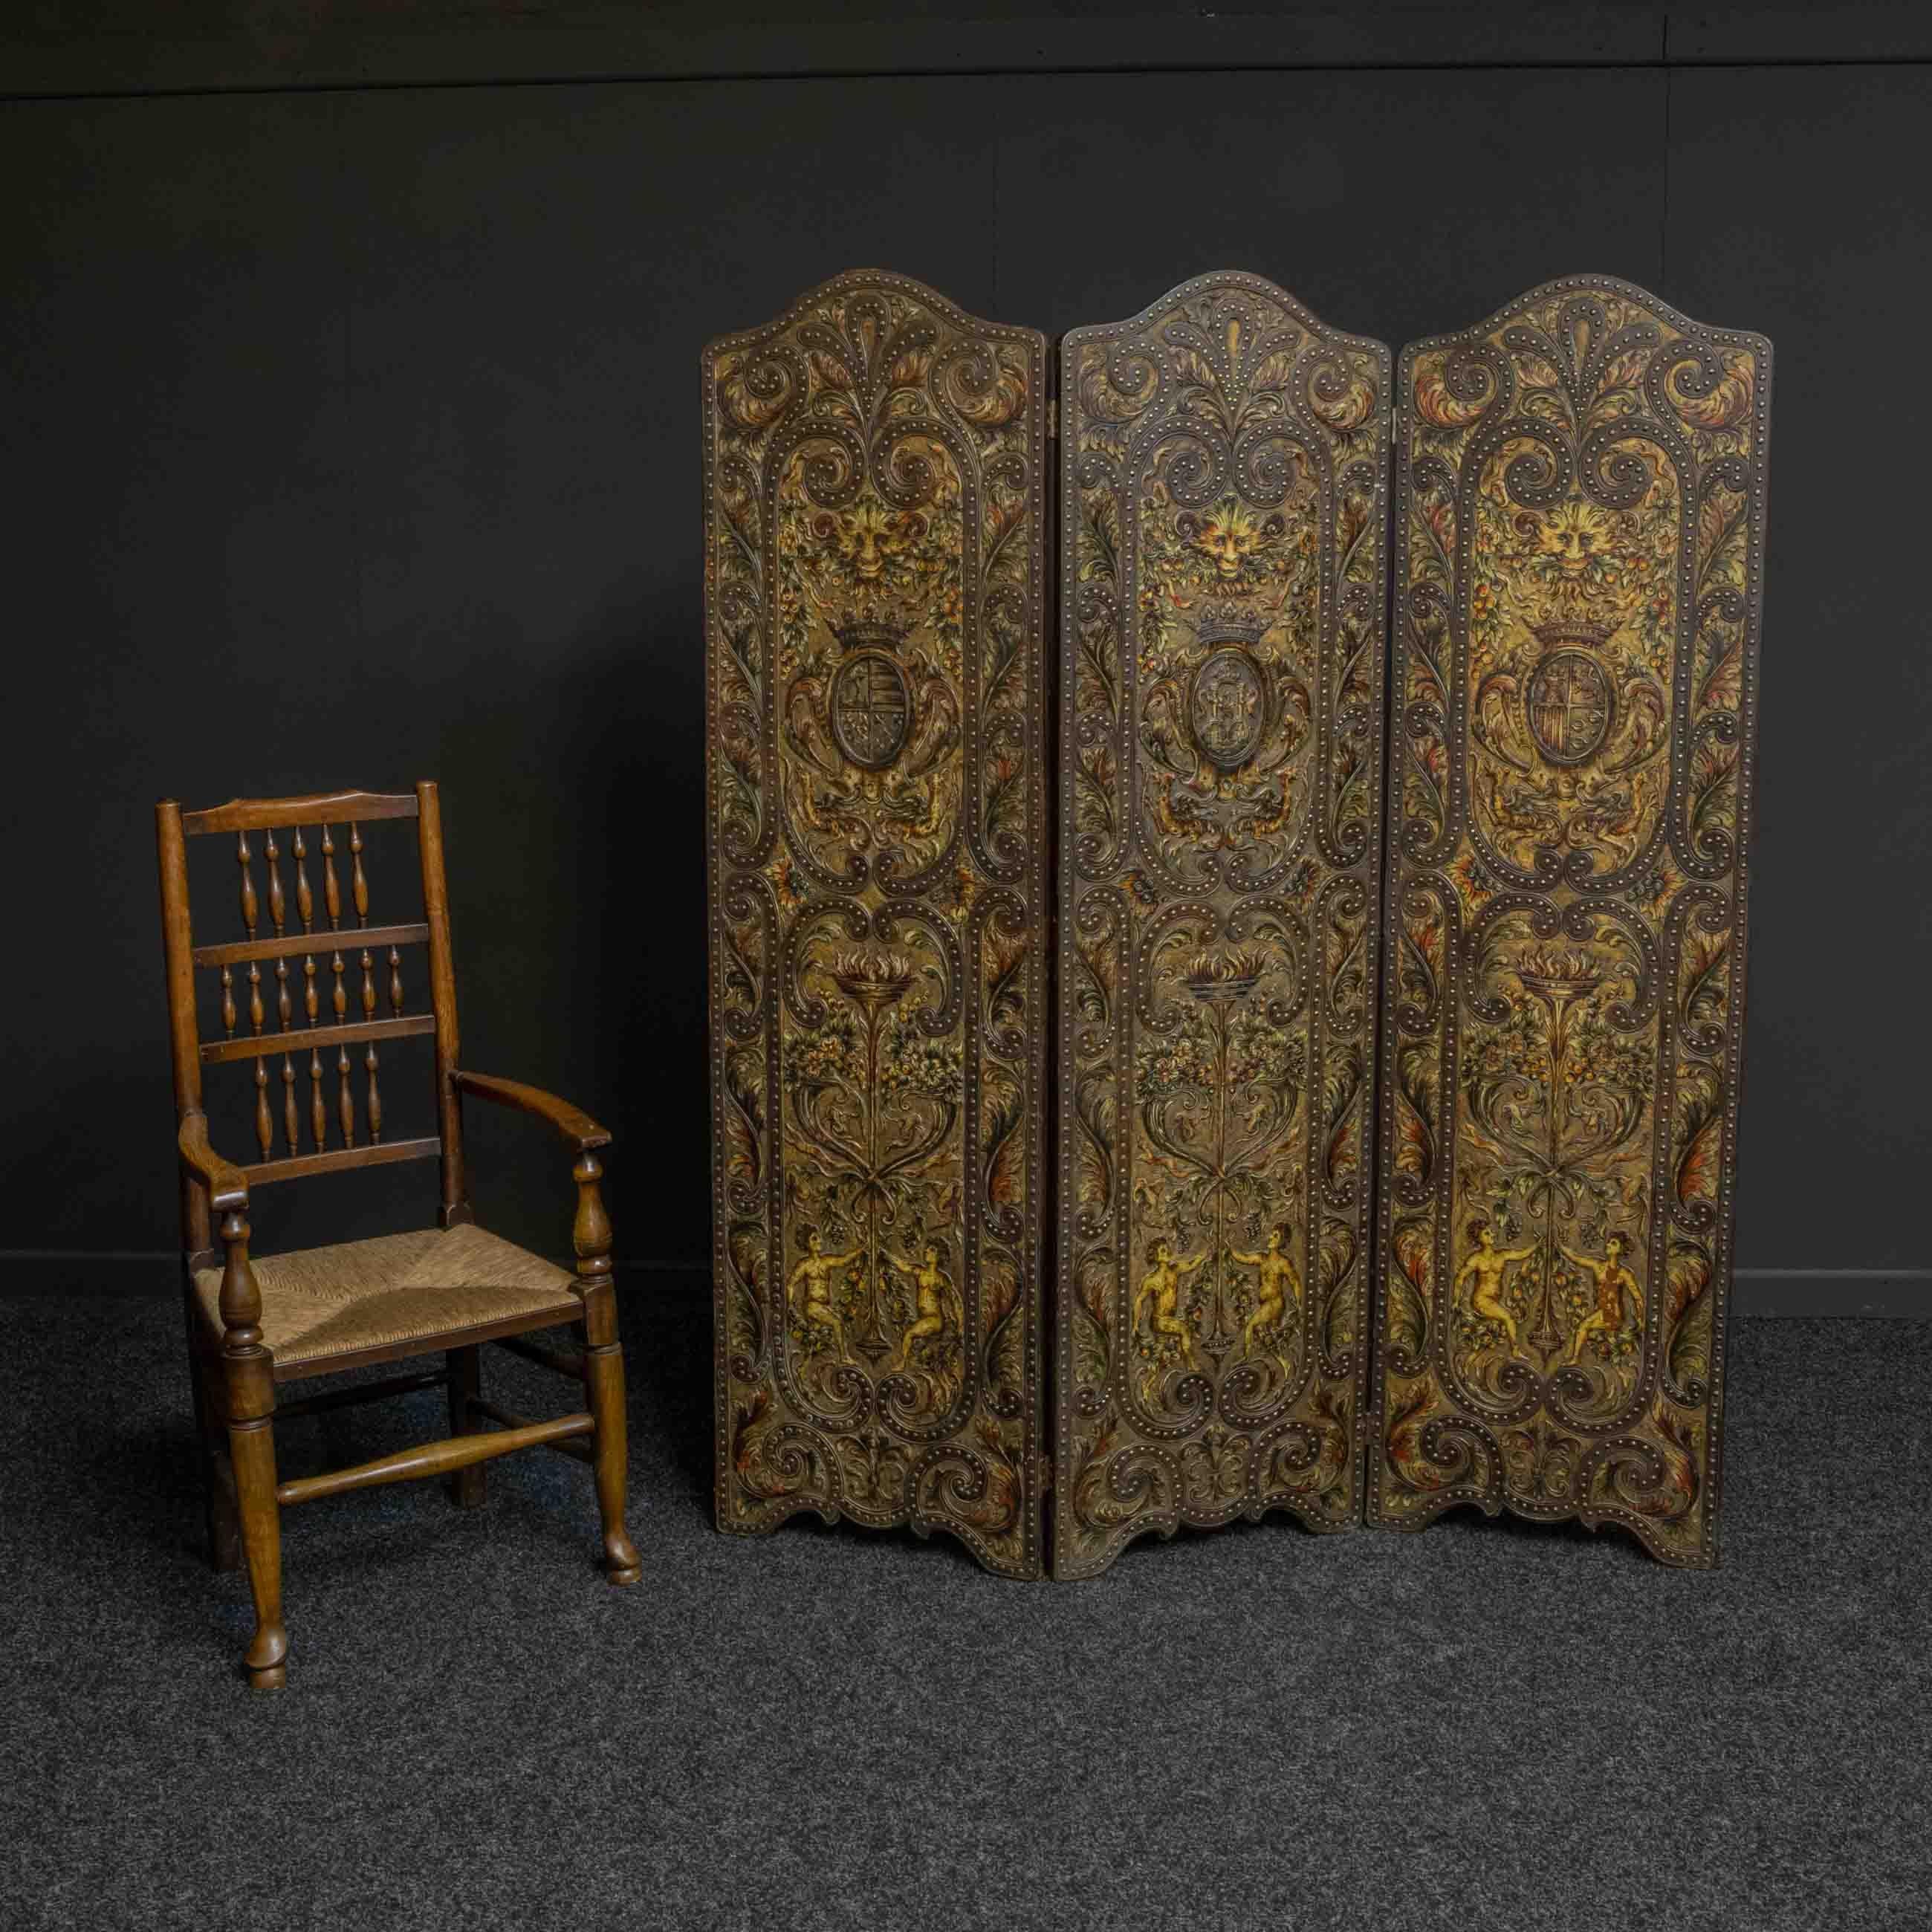 This is a very fine quality and heavy draught/dressing screen with highly detailed embossed leather on a hardwood frame. At the base are naked figures holding a flowering stem to a flamed torchere above which are mythological birds and grotesque